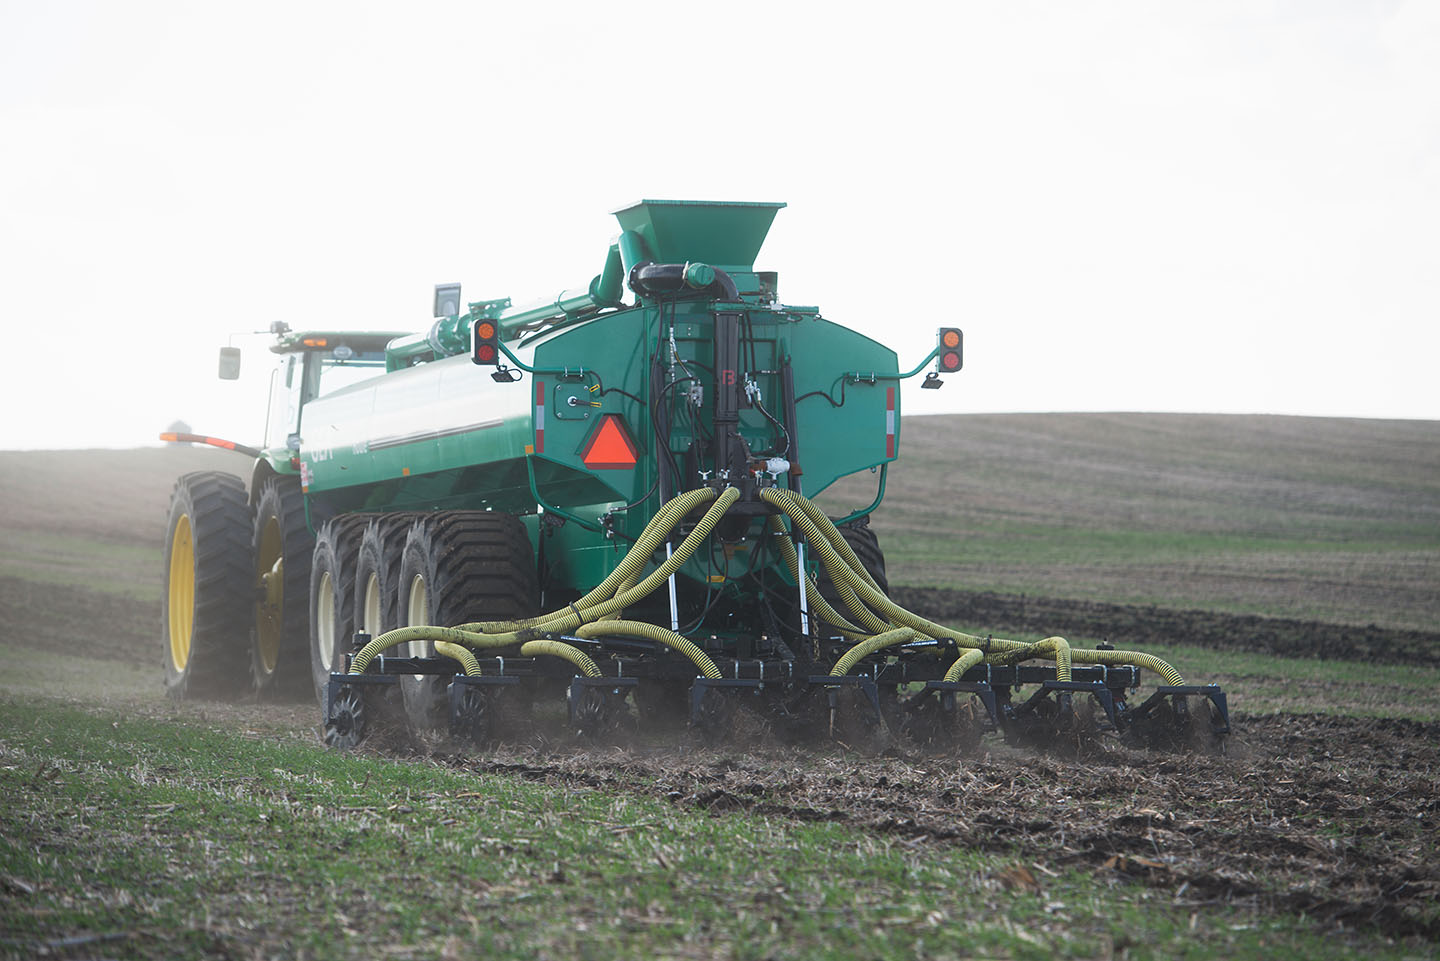 A farmer operates a manure spreader in one of their fie